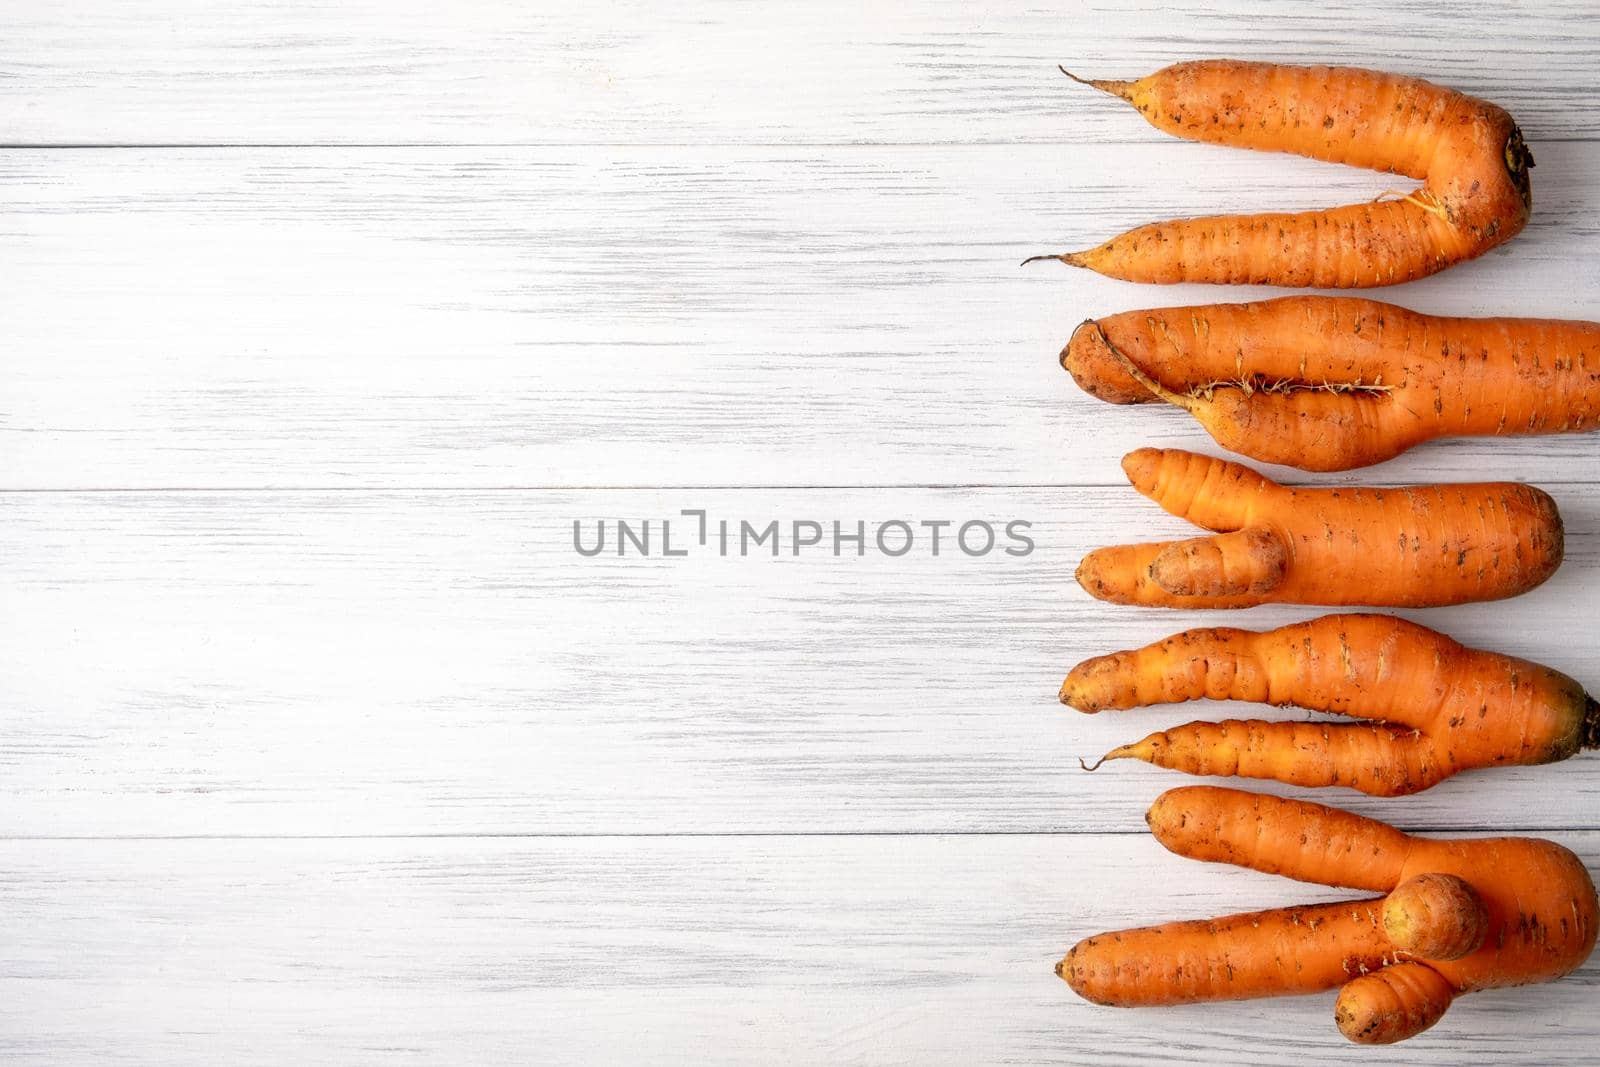 Top view close-up of several ripe orange ugly carrots lie on a light wooden surface with copy space for text. Selective focus.